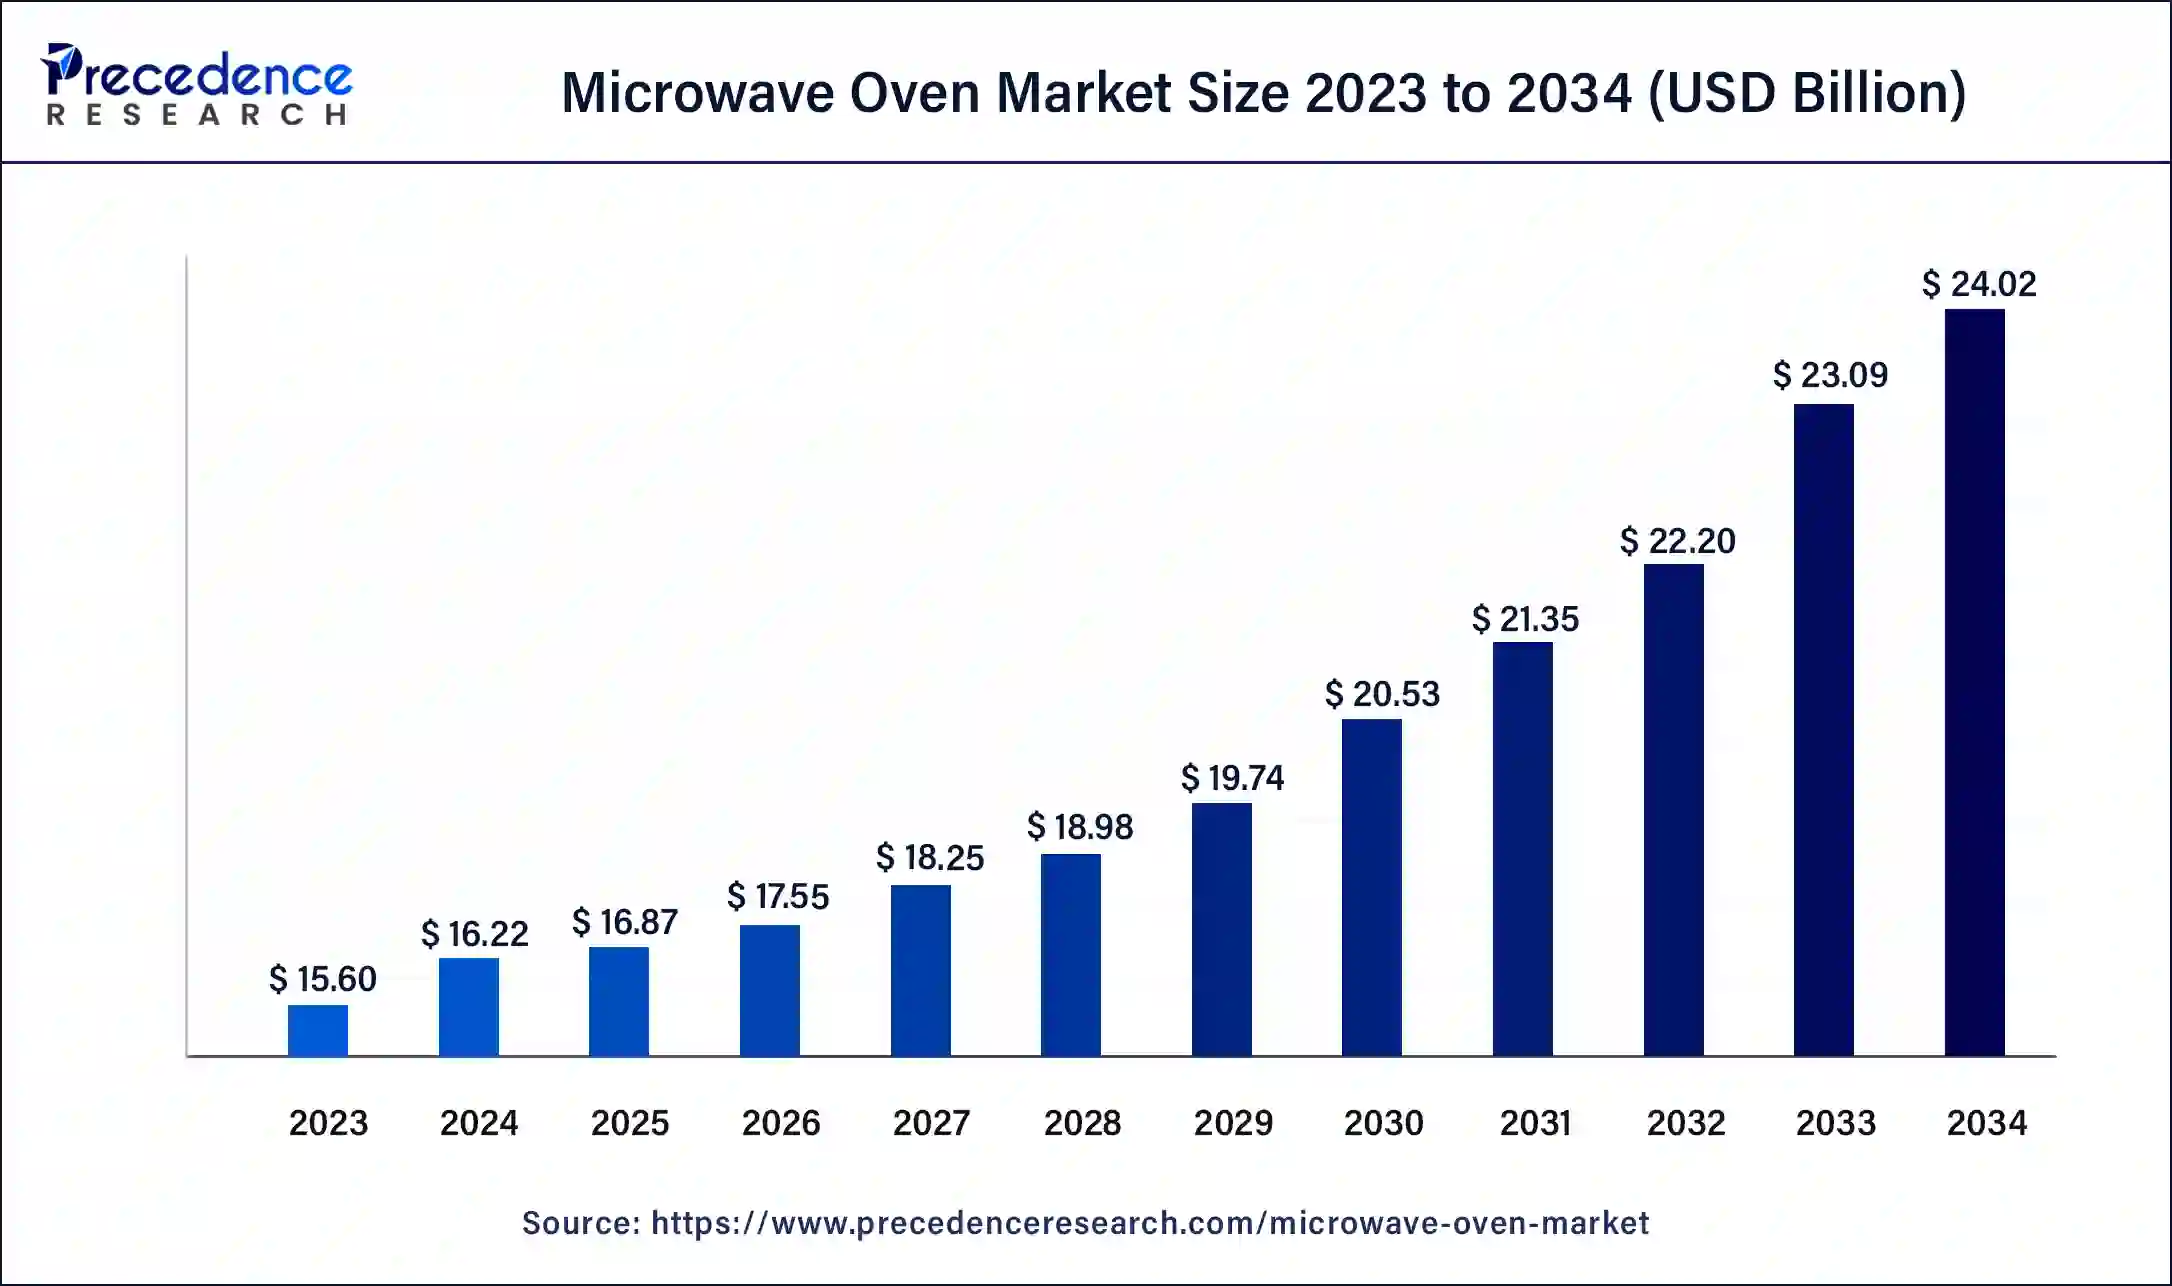 Microwave Oven Market Size 2024 to 2034